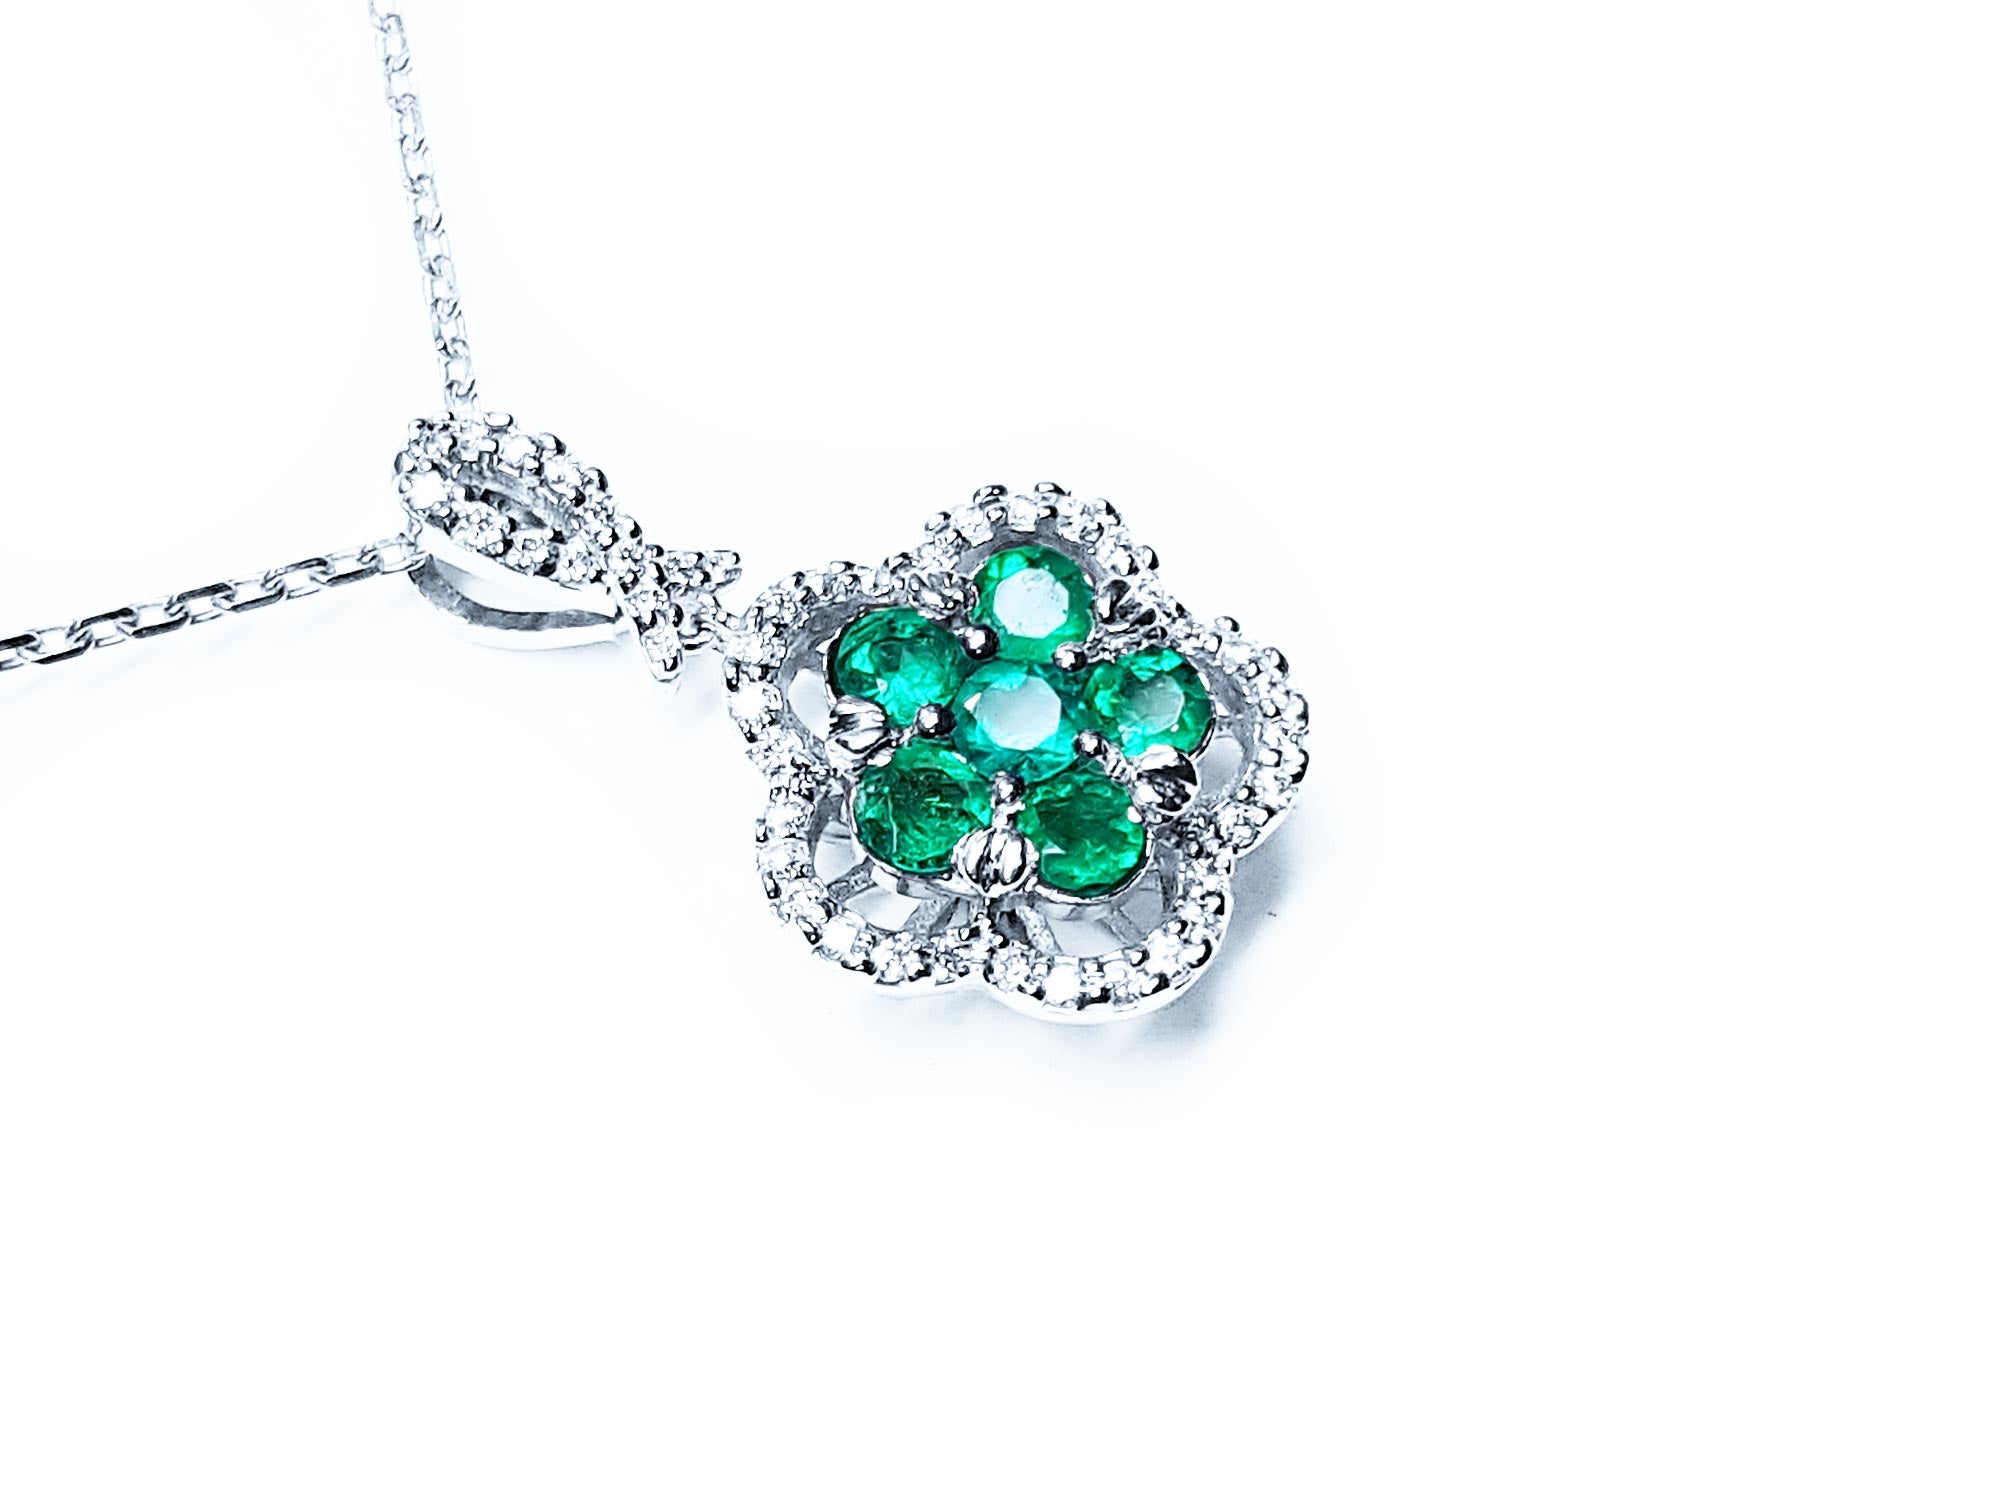 Emerald cluster necklace